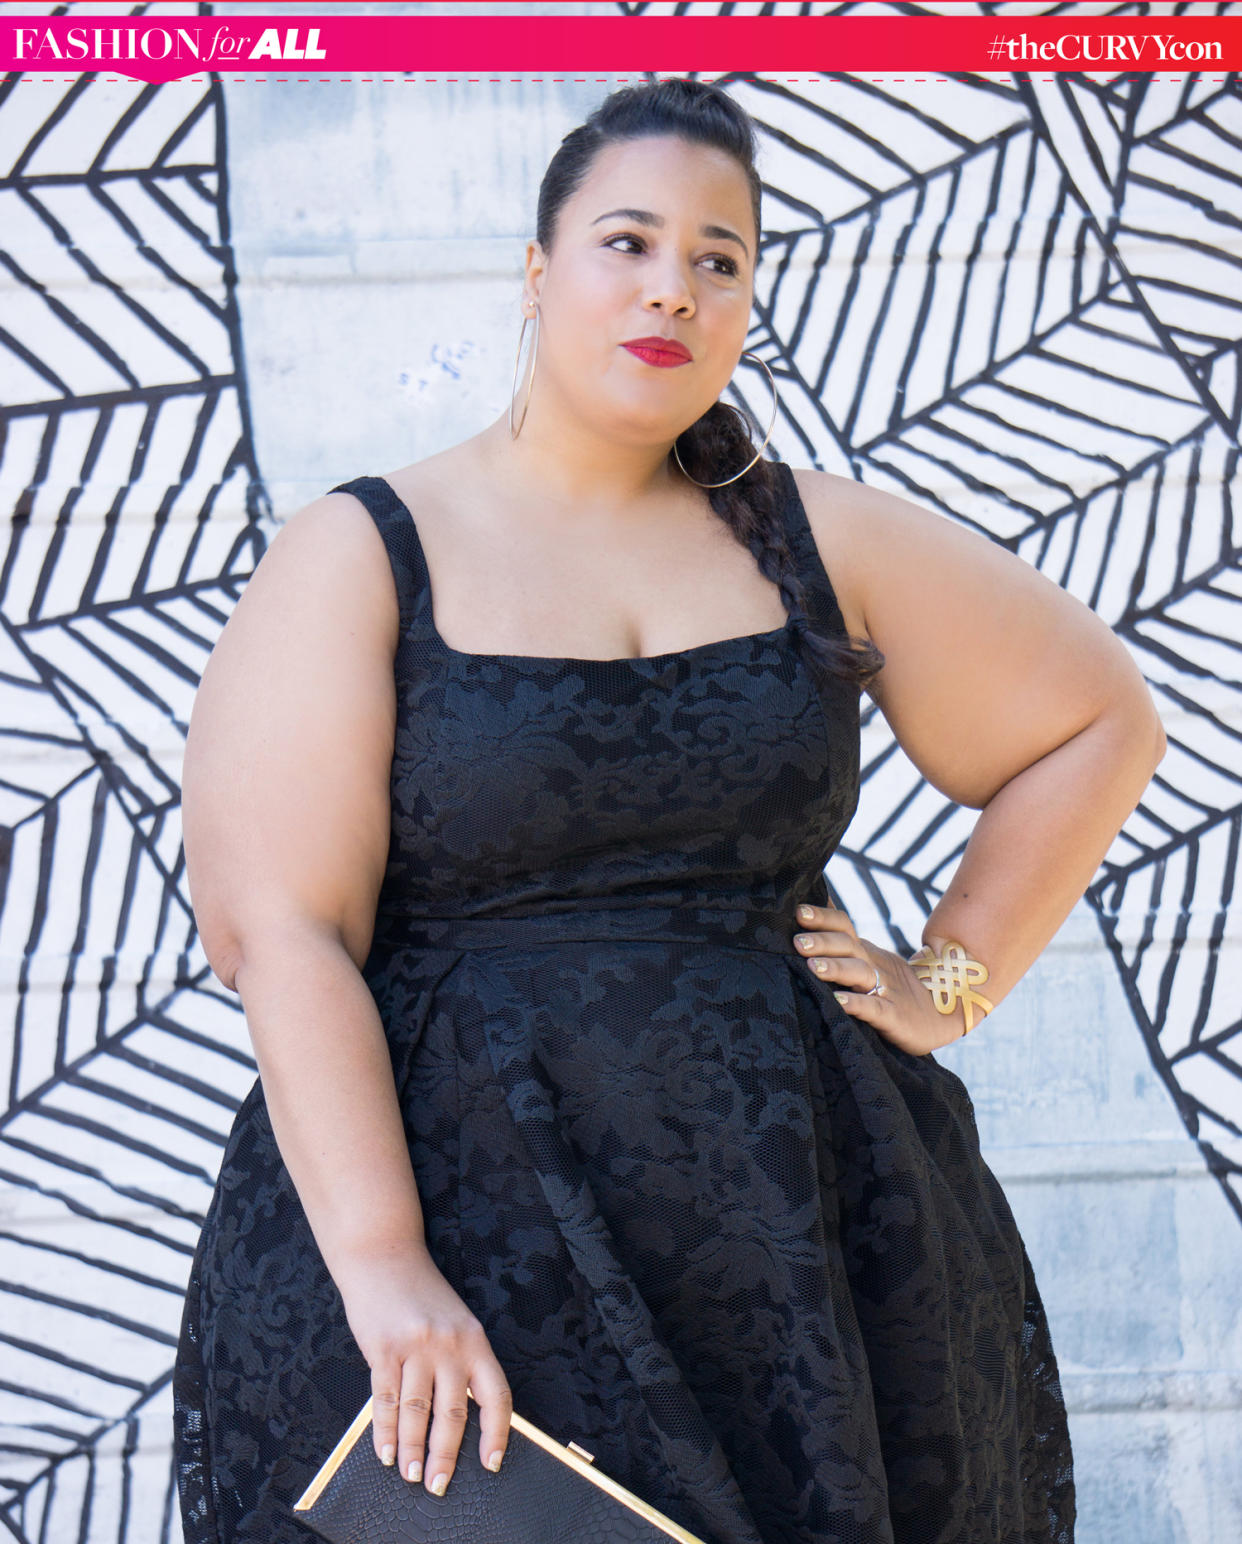 Chastity Garner is a co-founder of theCURVYcon, the body-positive conference <a href=